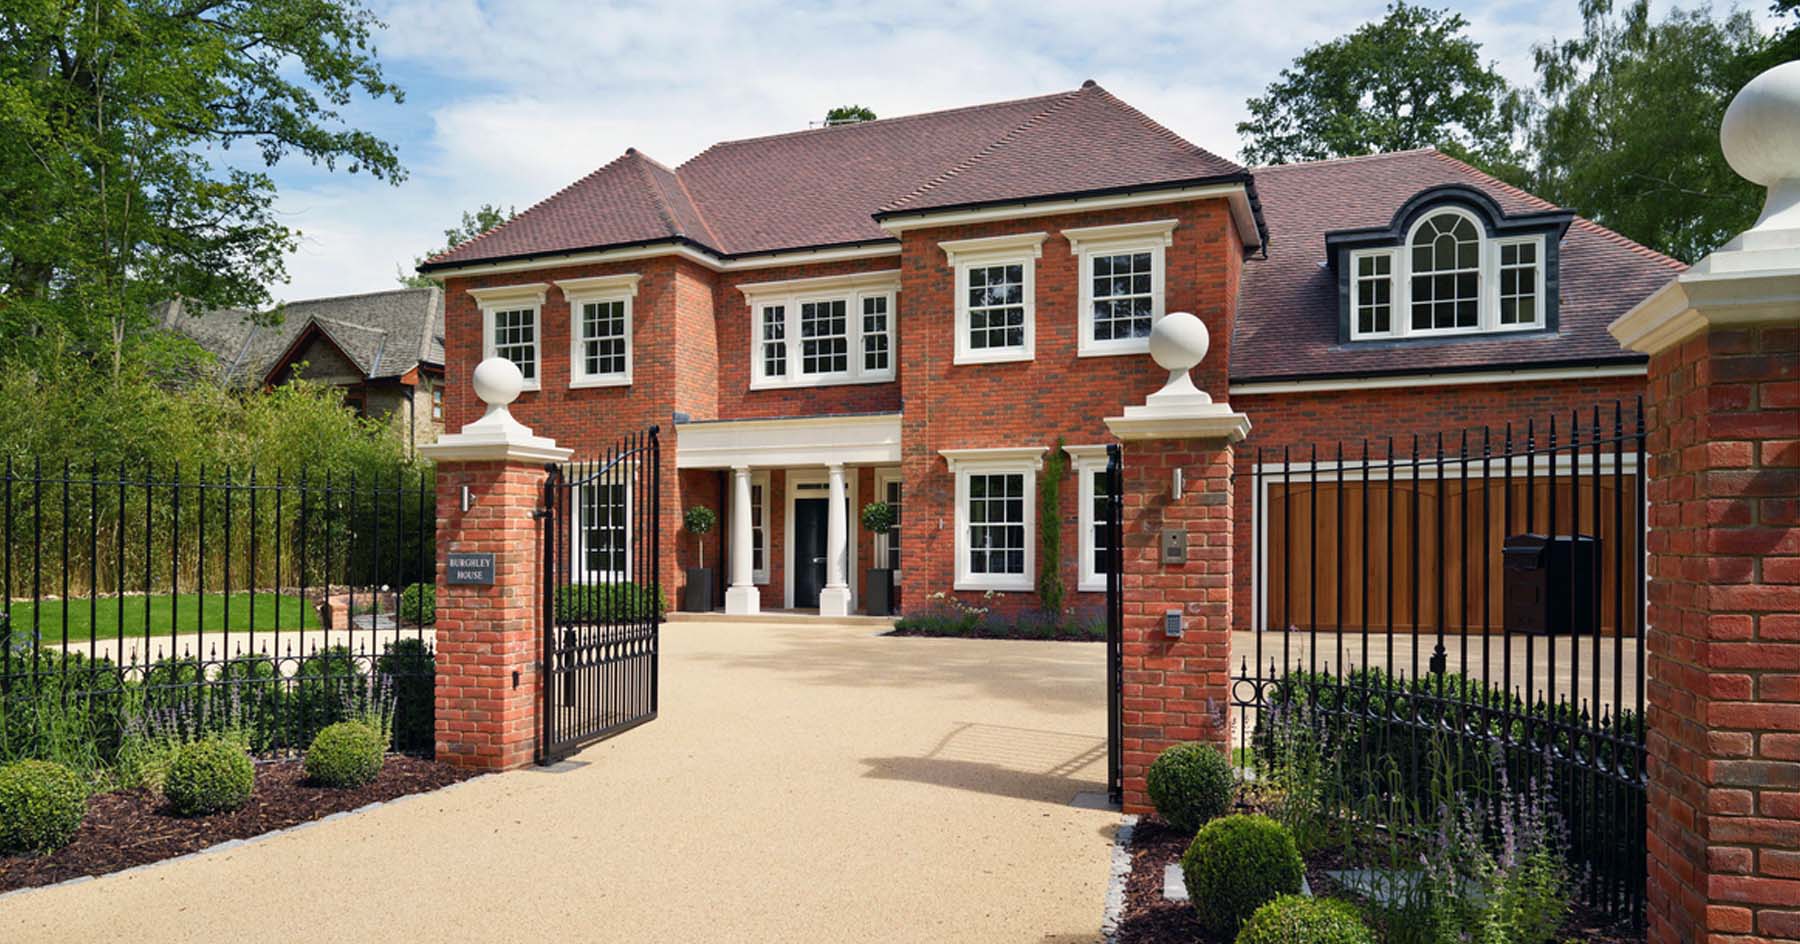 Beautiful custom red brick home with purple gray roof shingle. Black front door. Tan stone trim and columns. Arched dormers. Red brick pillars with black gate and stone cap.